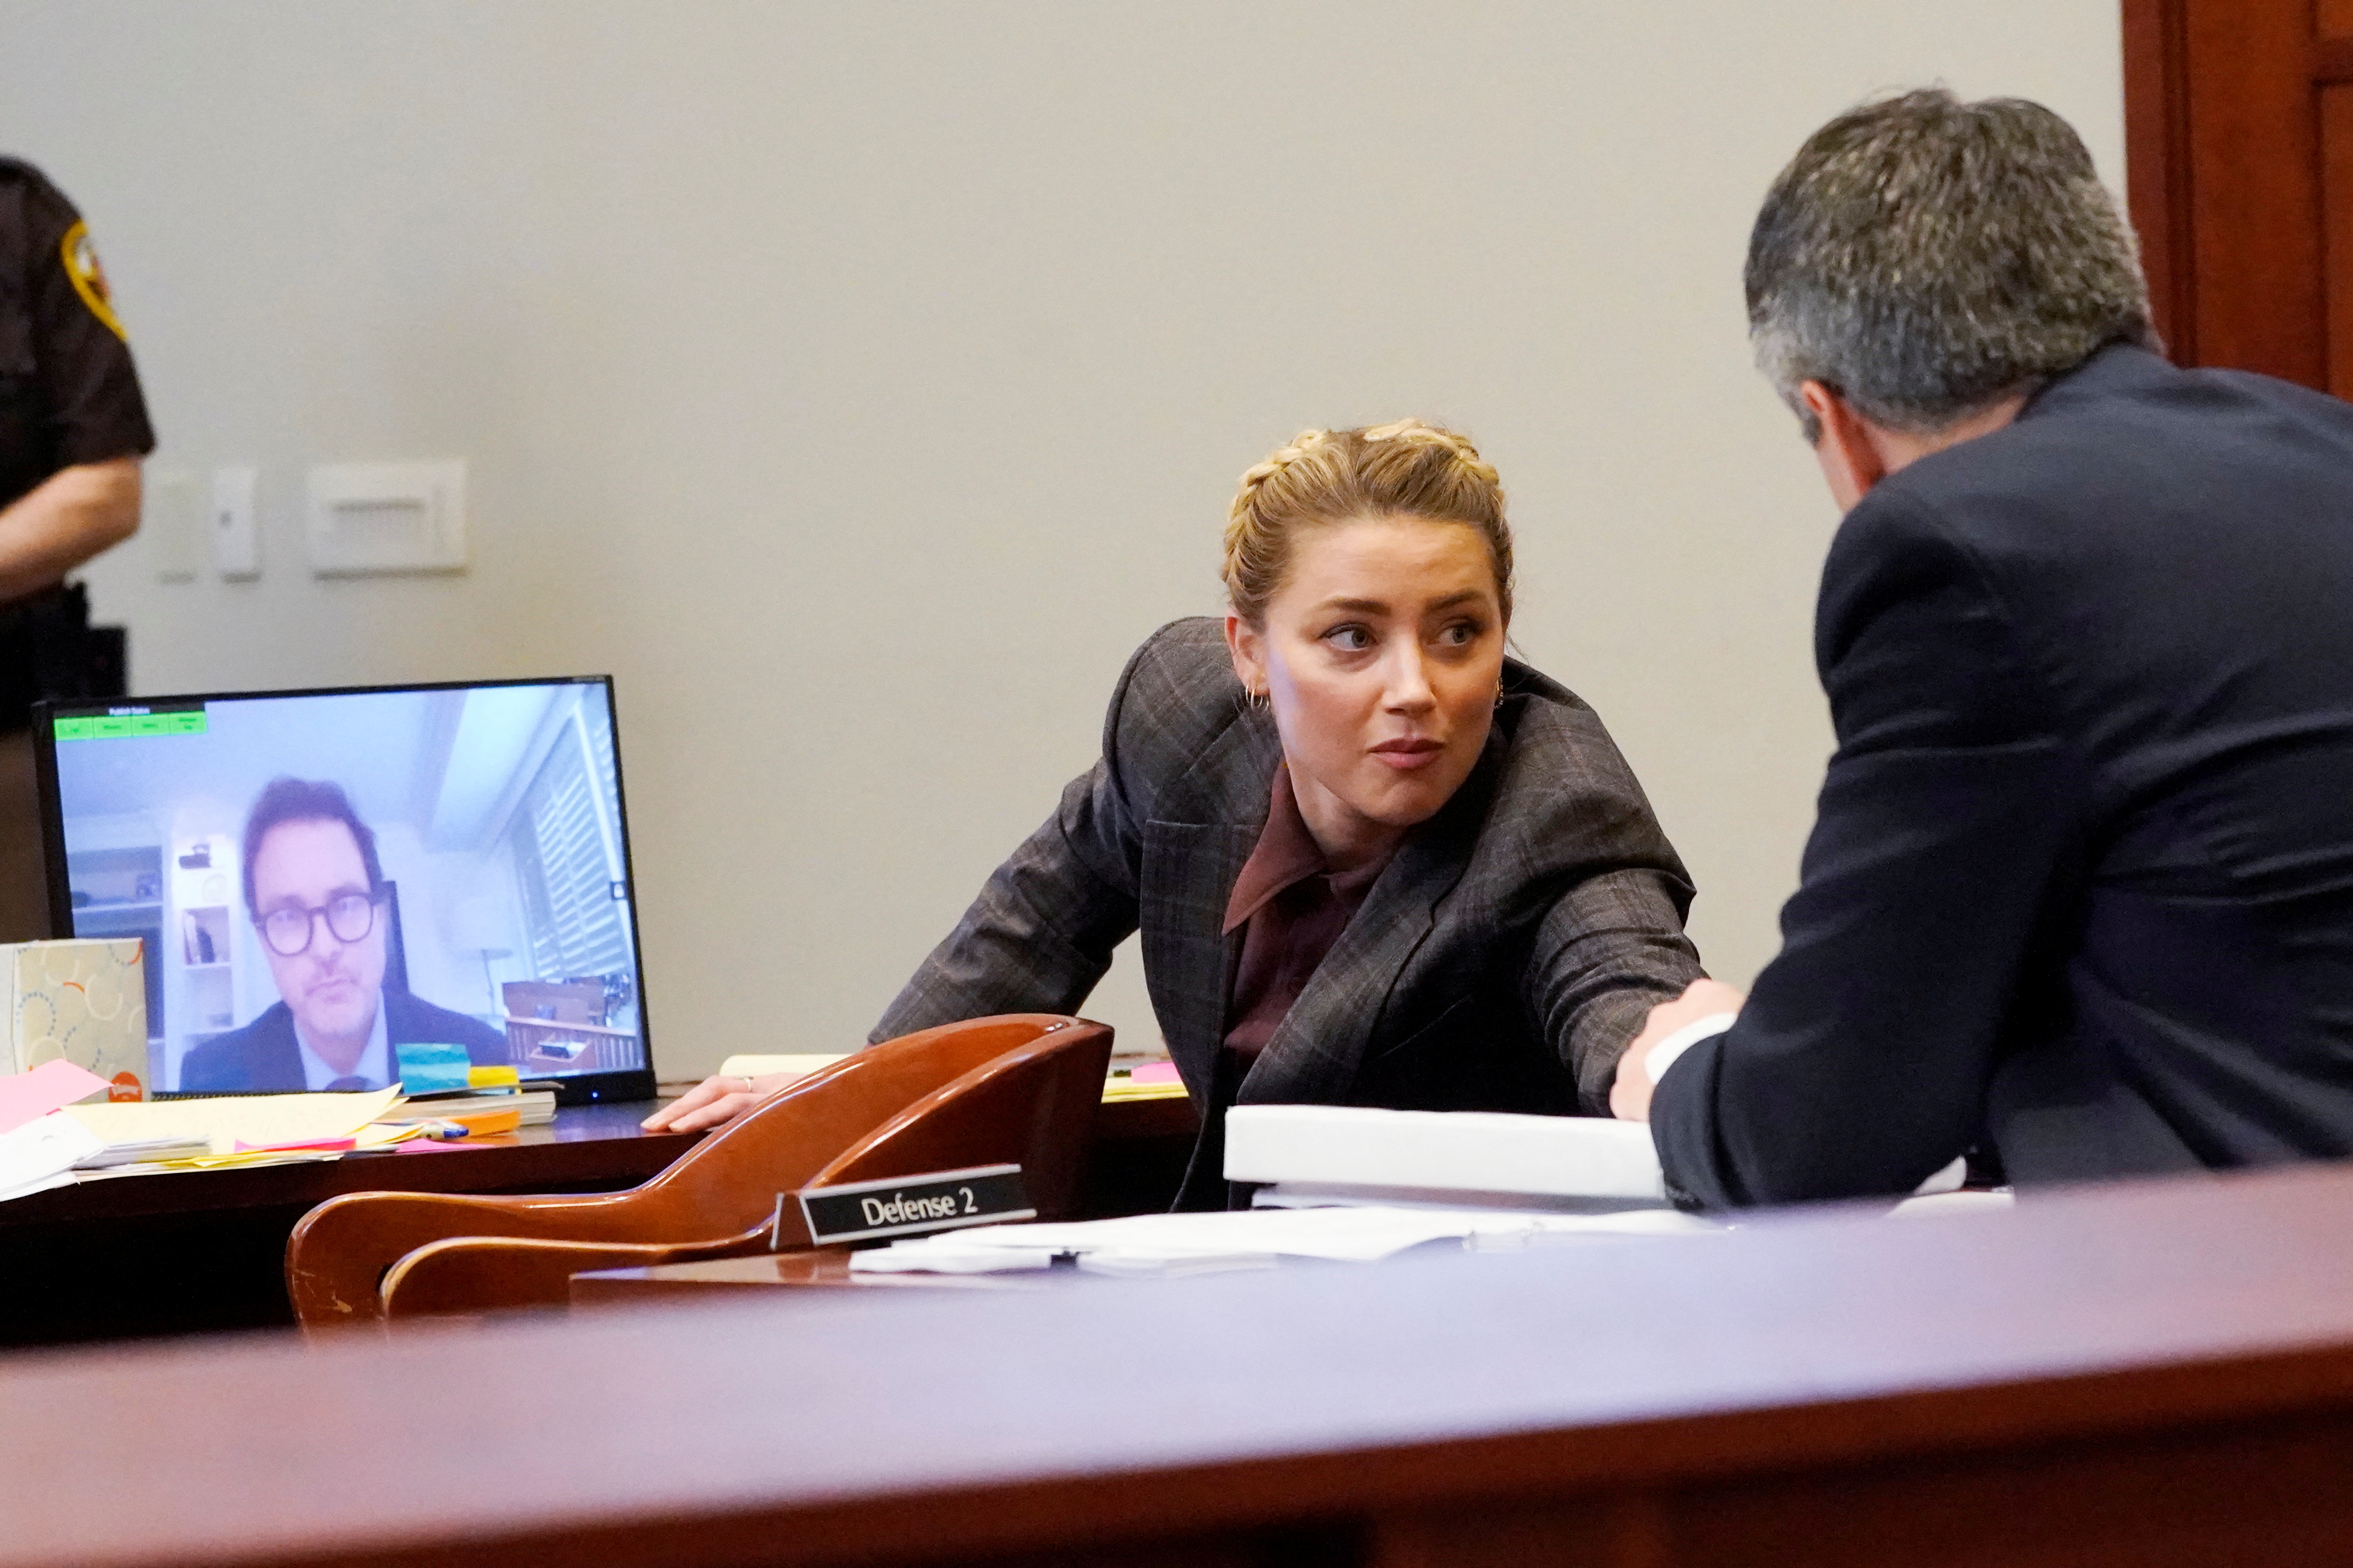 Actor Amber Heard talks to her attorney as Jack Whigham, talent manager for Johnny Depp, is seen on a monitor as he testifies remotely at Fairfax County Circuit Court during a defamation case against her by Depp, her ex-husband, in Fairfax, Virginia, U.S., May 2, 2022. Steve Helber/Pool via REUTERS